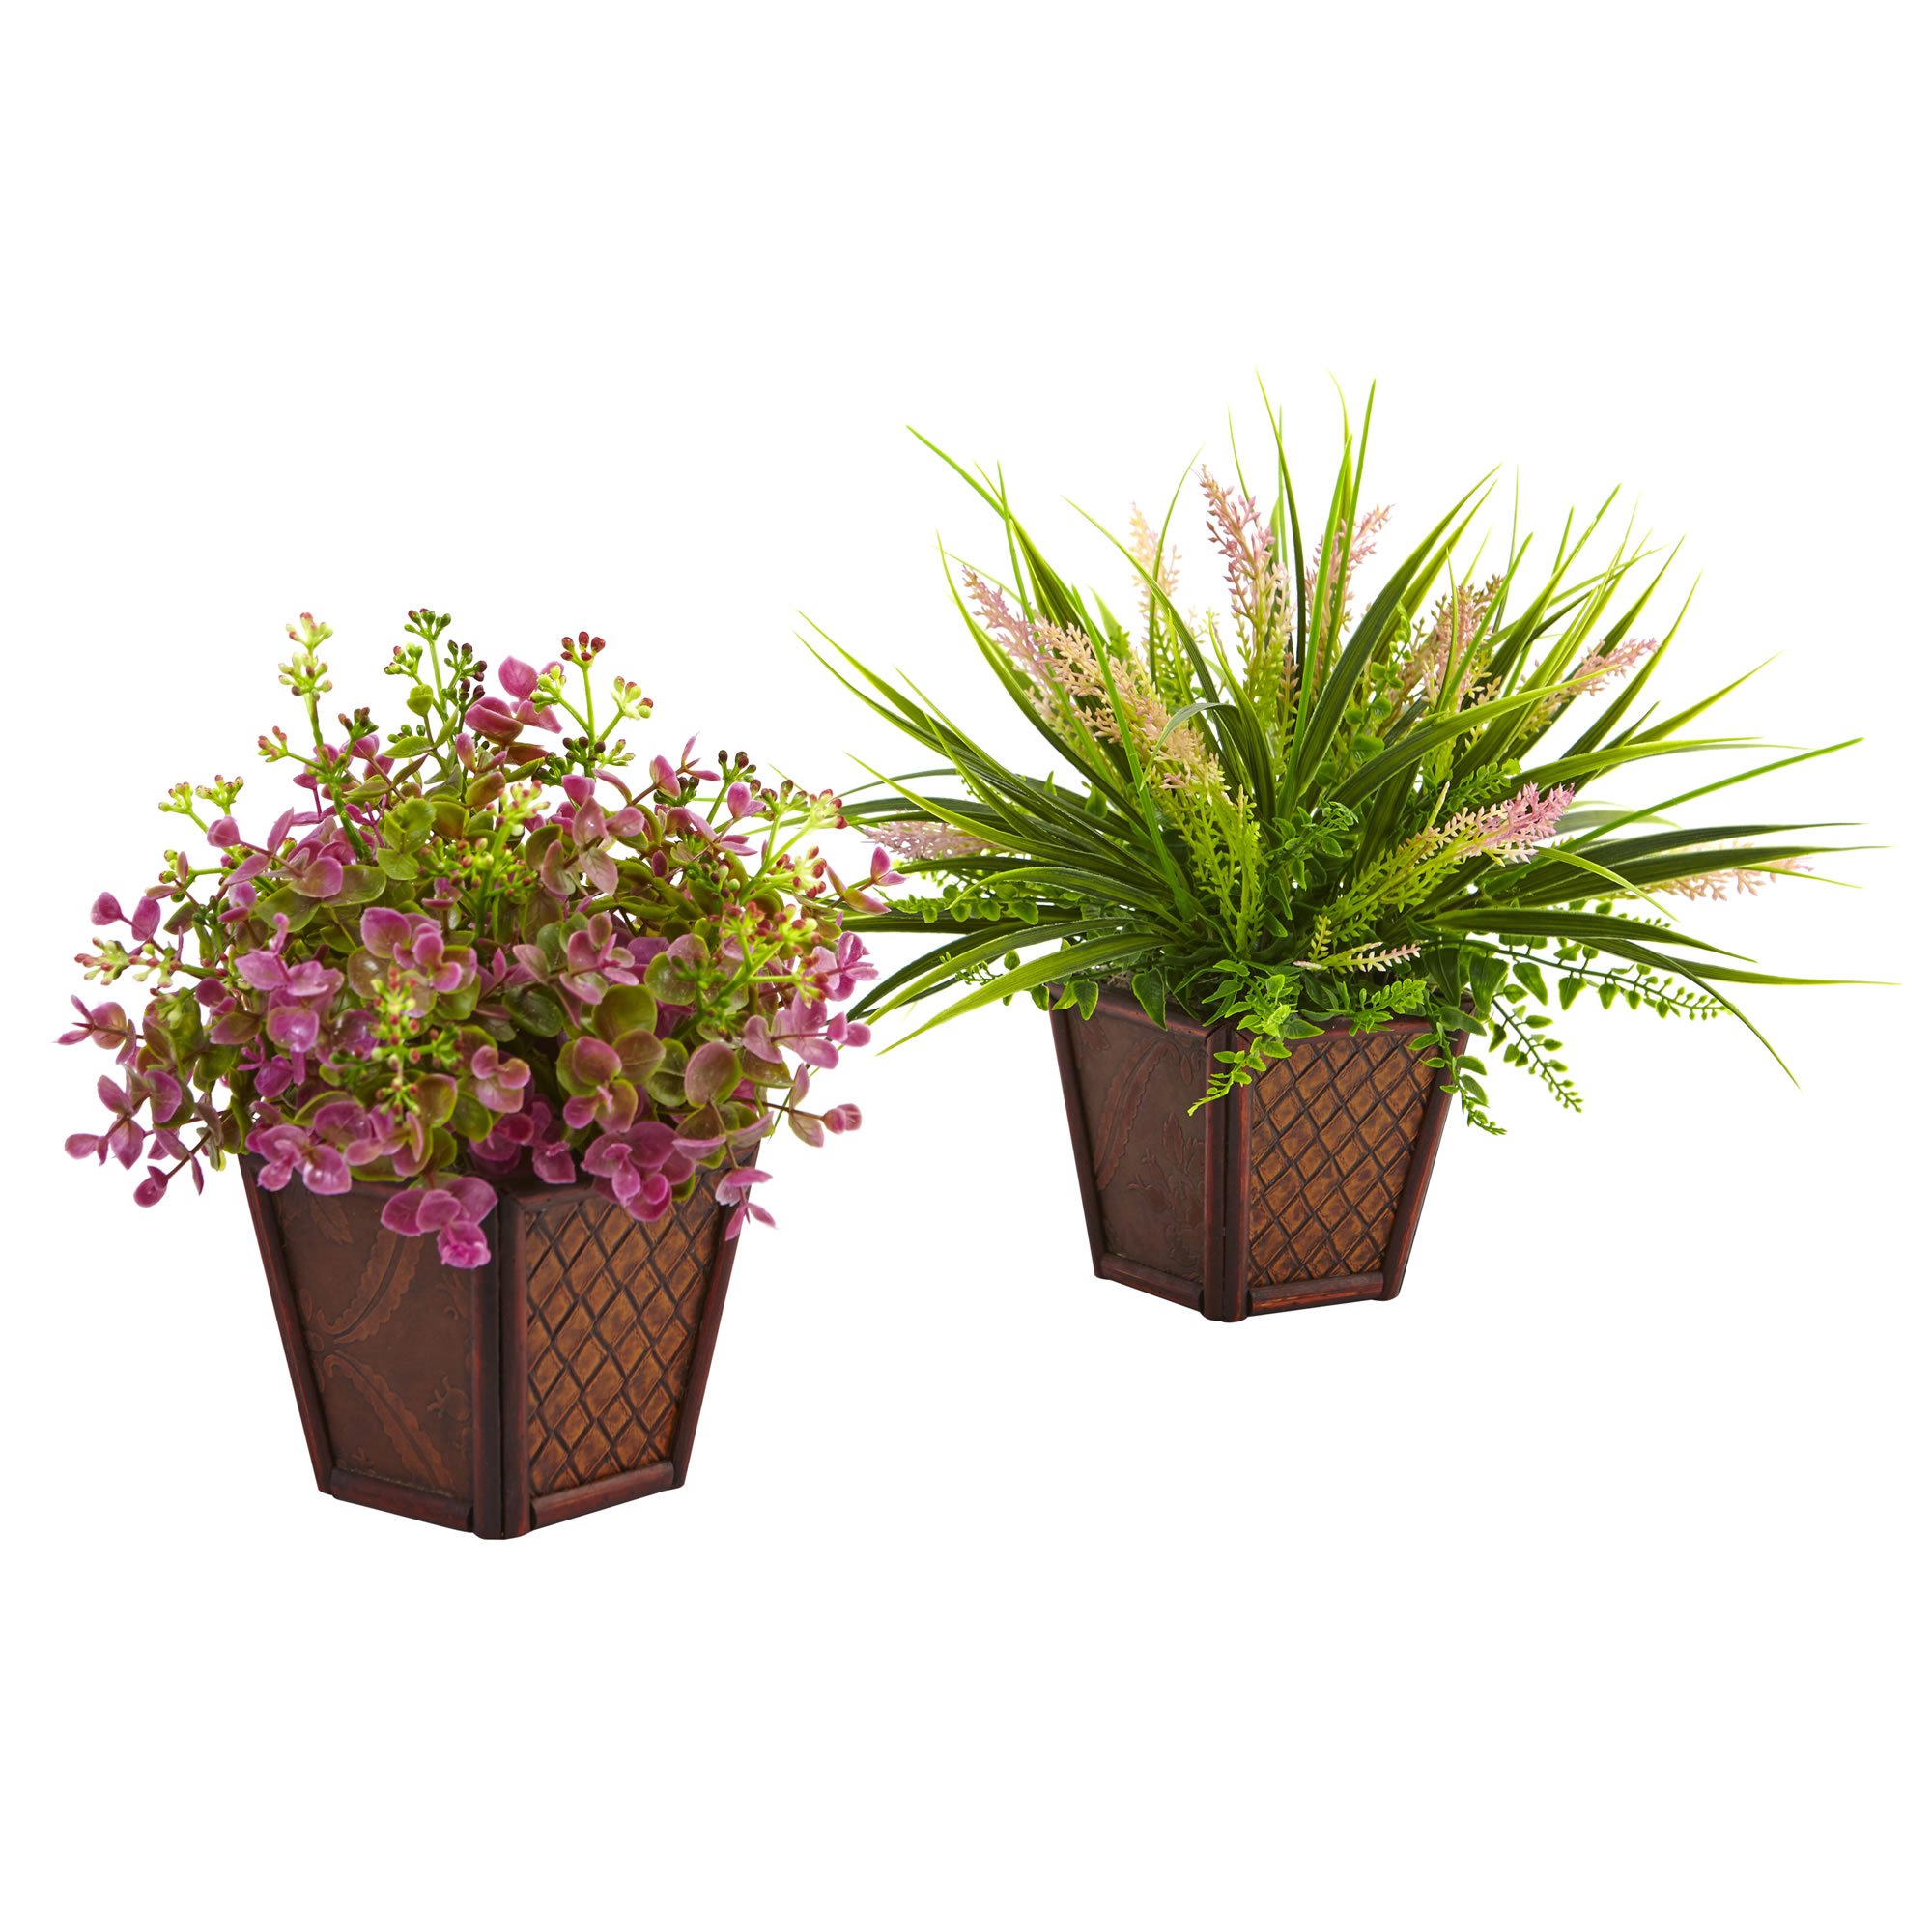 9 Inch Purple, Green Assorted Grass In Planter (set Of 2)